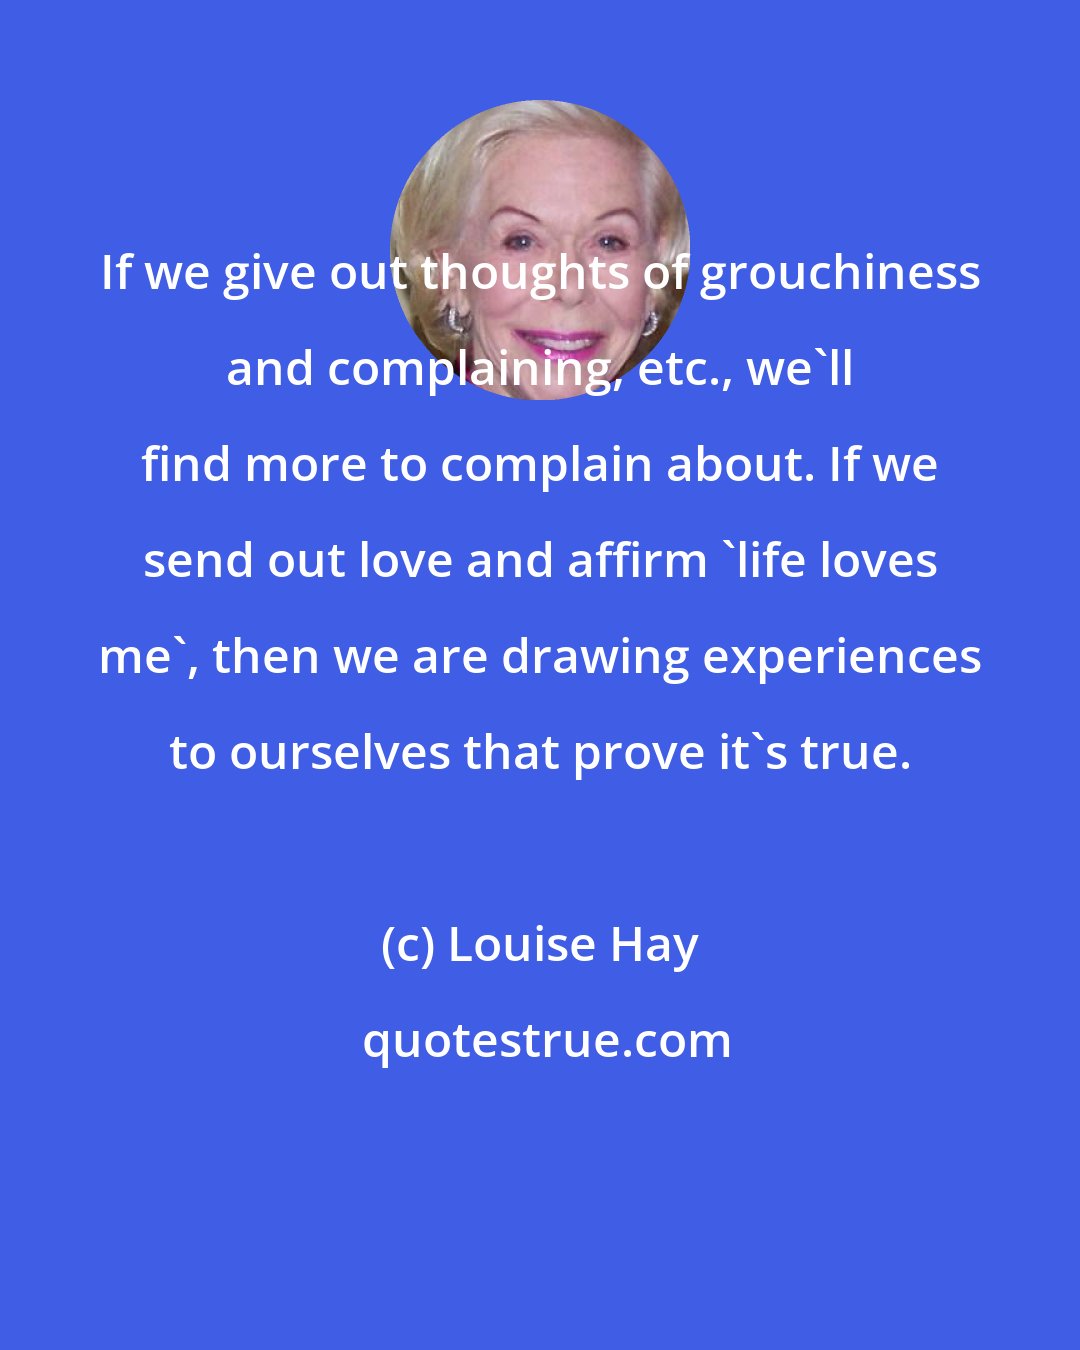 Louise Hay: If we give out thoughts of grouchiness and complaining, etc., we'll find more to complain about. If we send out love and affirm 'life loves me', then we are drawing experiences to ourselves that prove it's true.